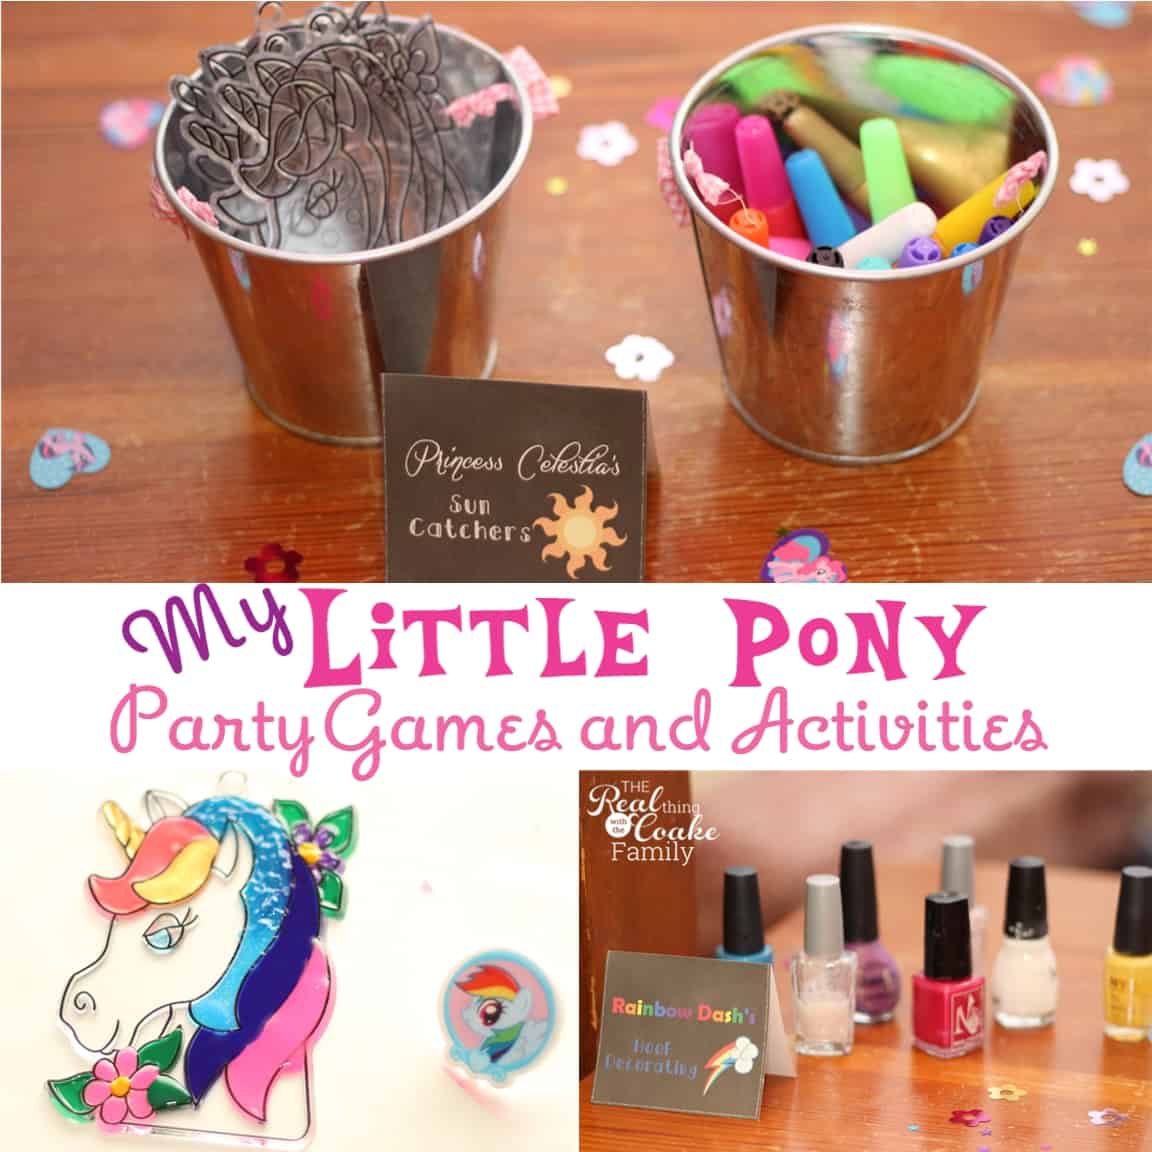 My Little Pony Games ~ Perfect for a My Little Pony themed birthday party! #MyLittlePony #MLP #Games #Birthday #Party #RealCoake 